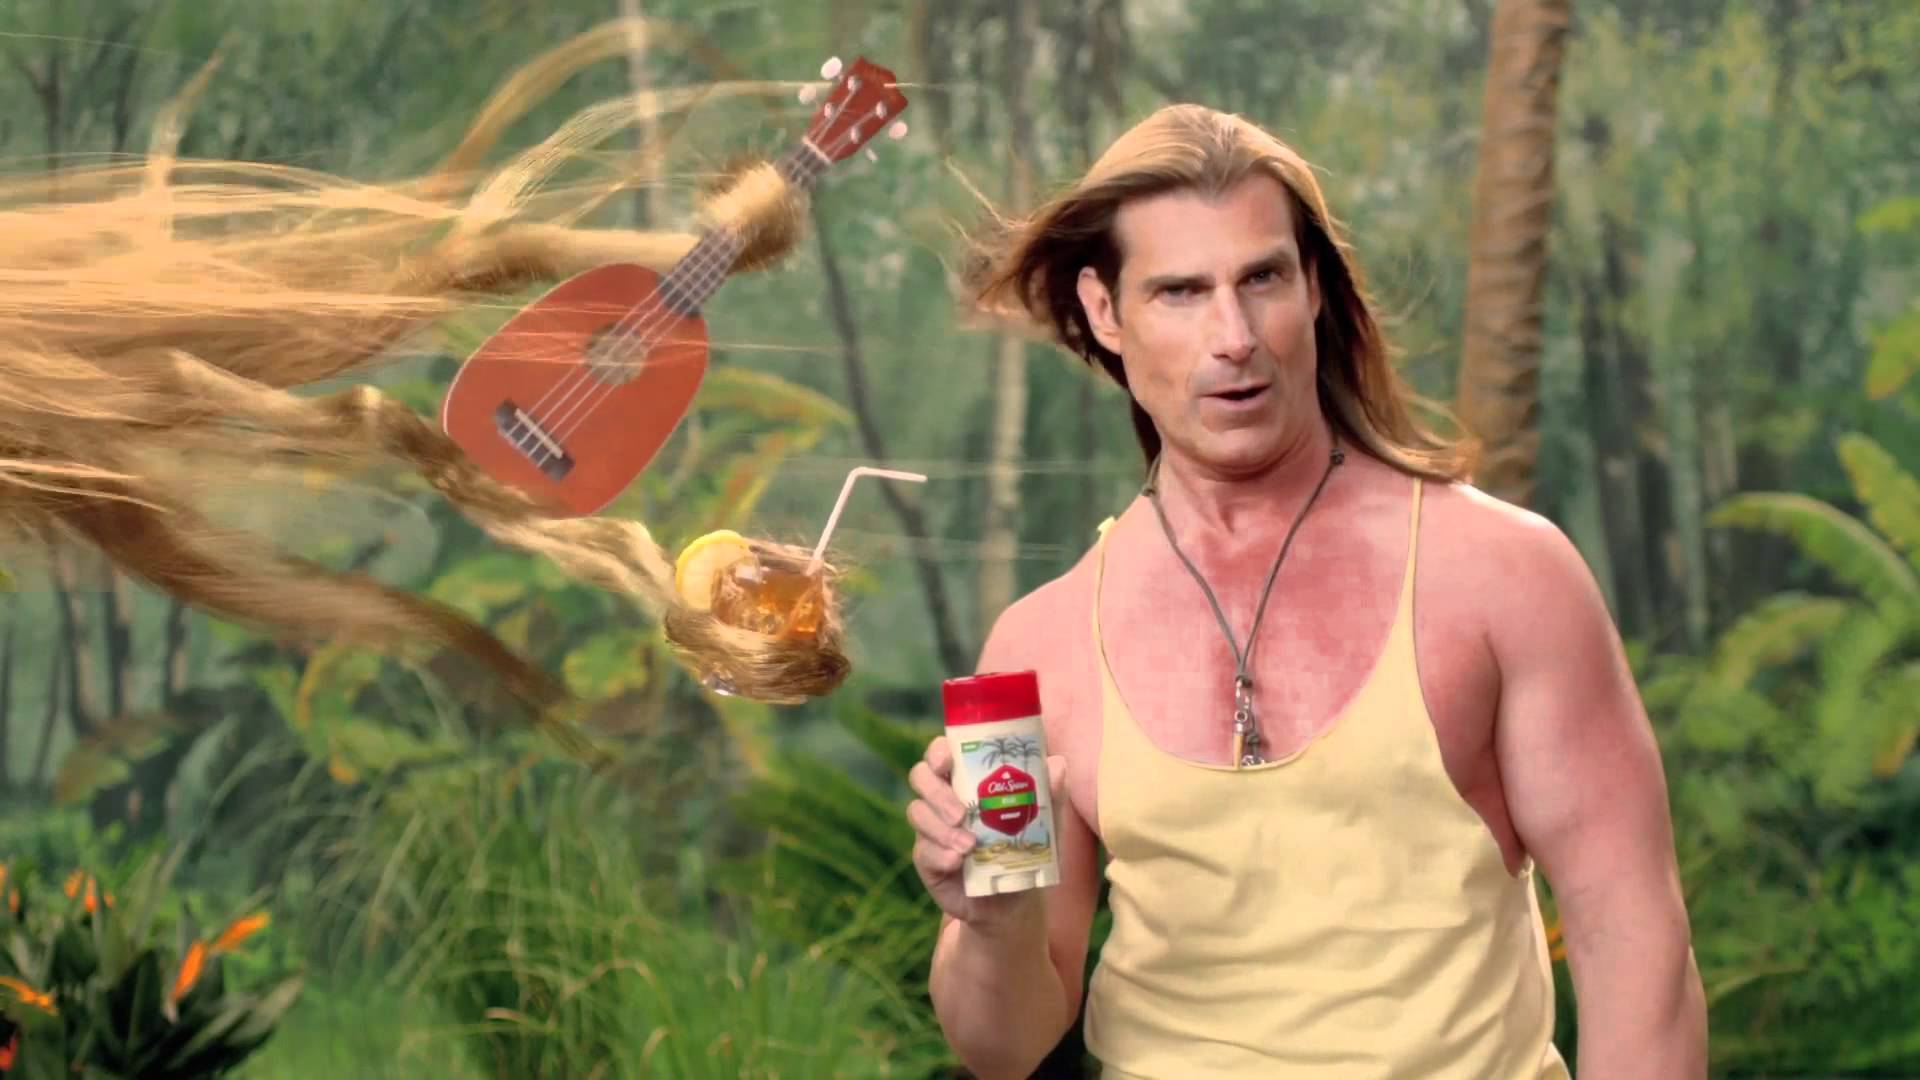 Hair featuring NEW Old Spice Guy Fabio - YouTube